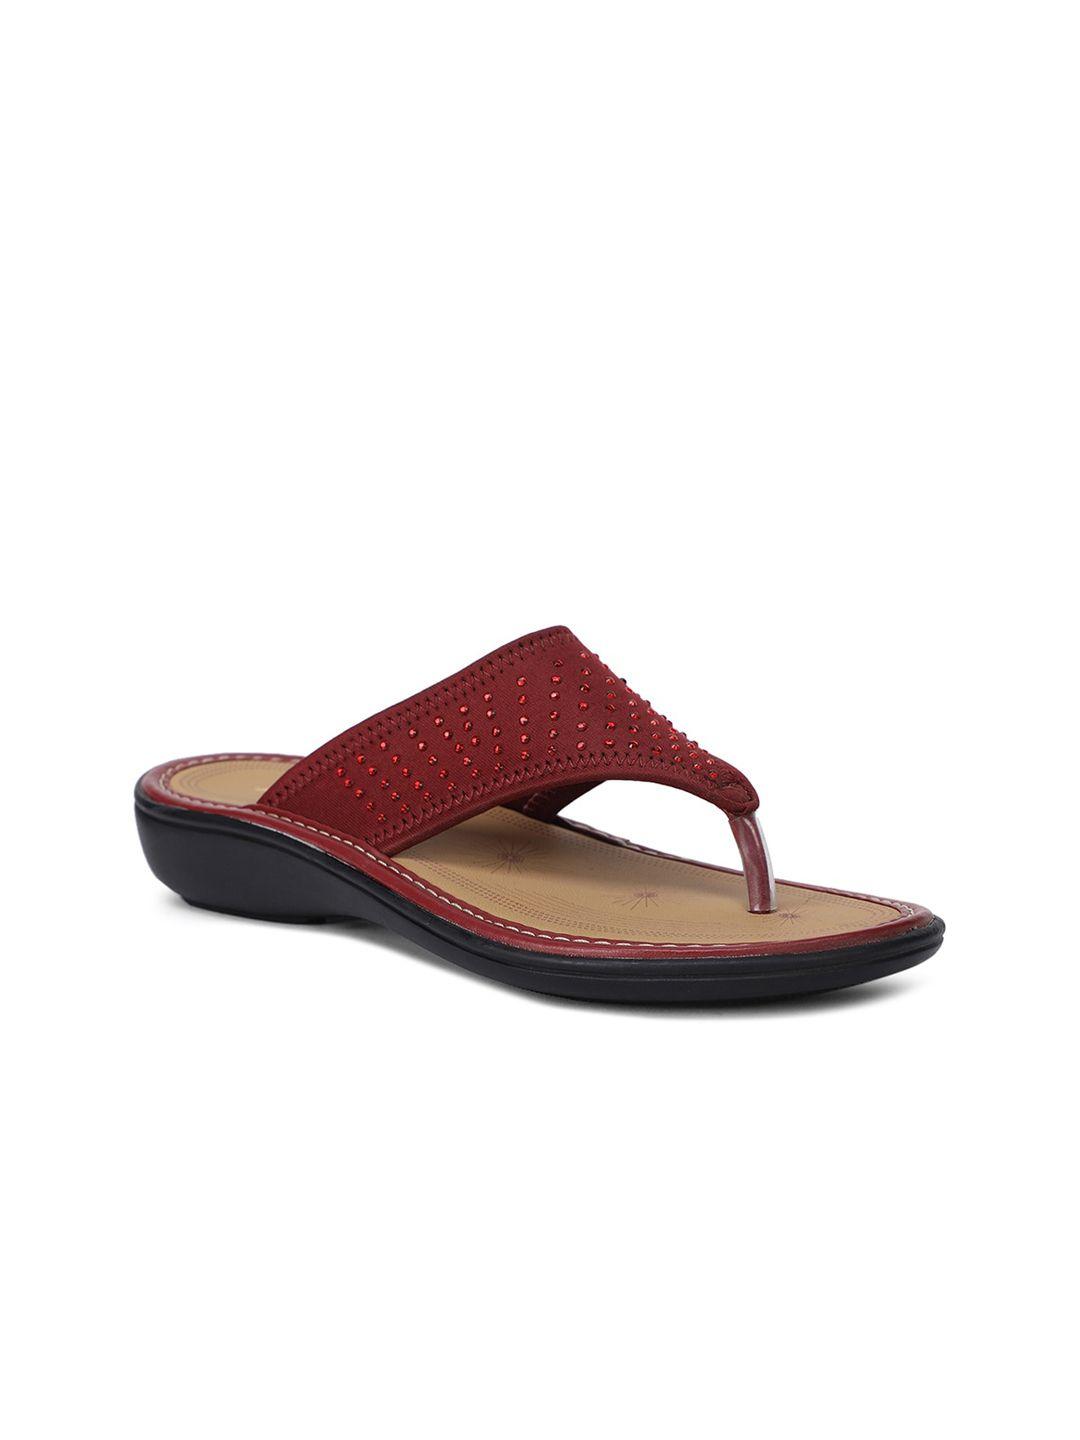 bata women red t-strap flats with laser cuts